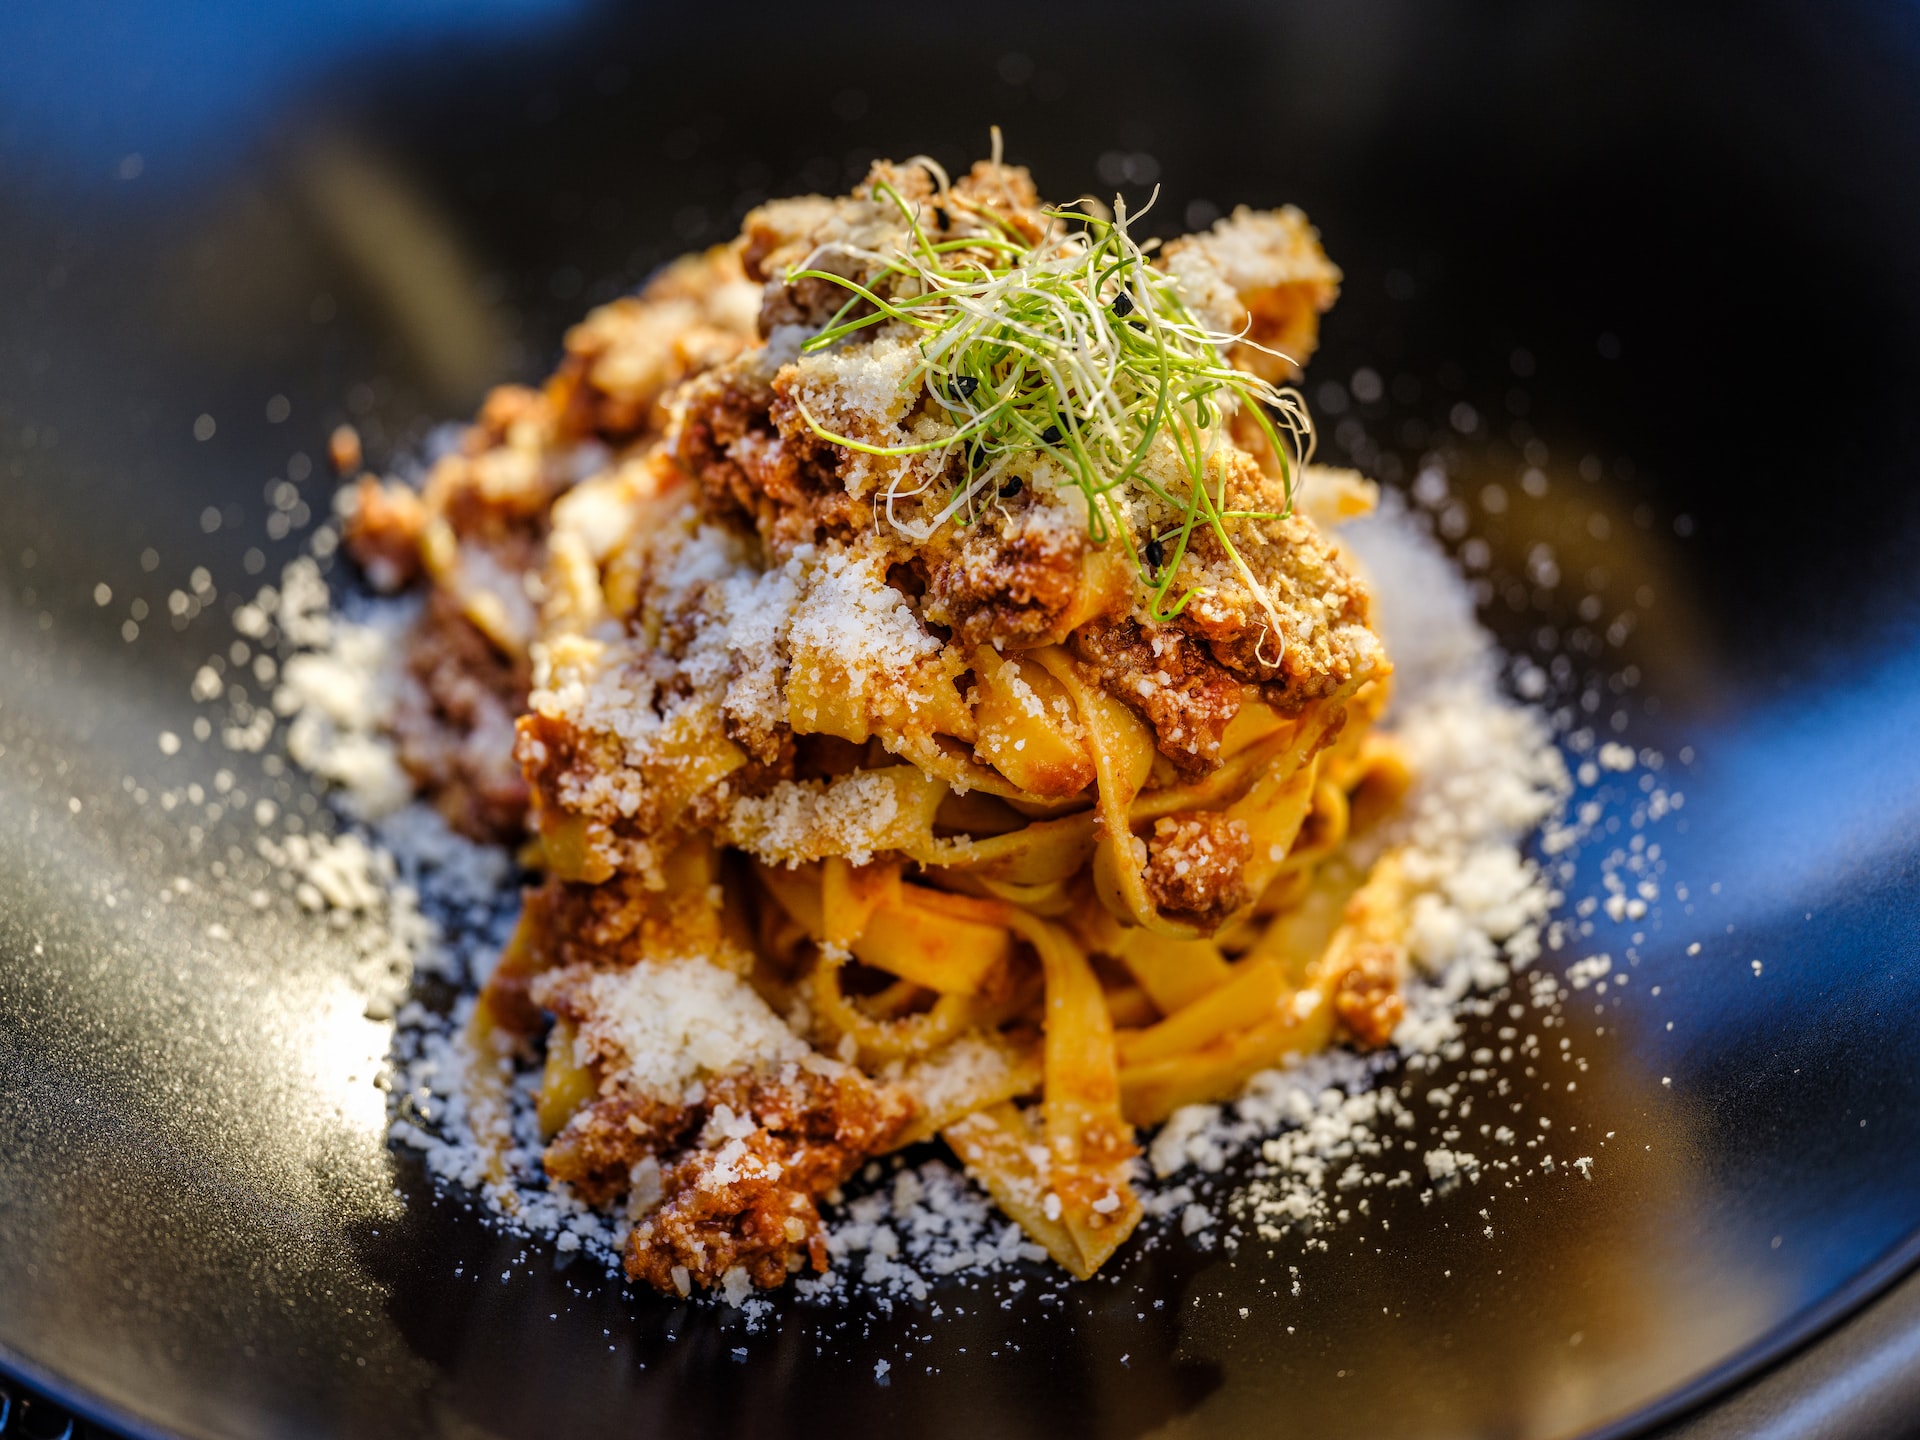 Upscale Italian food; pasta piled high on a black plate with grated cheese.